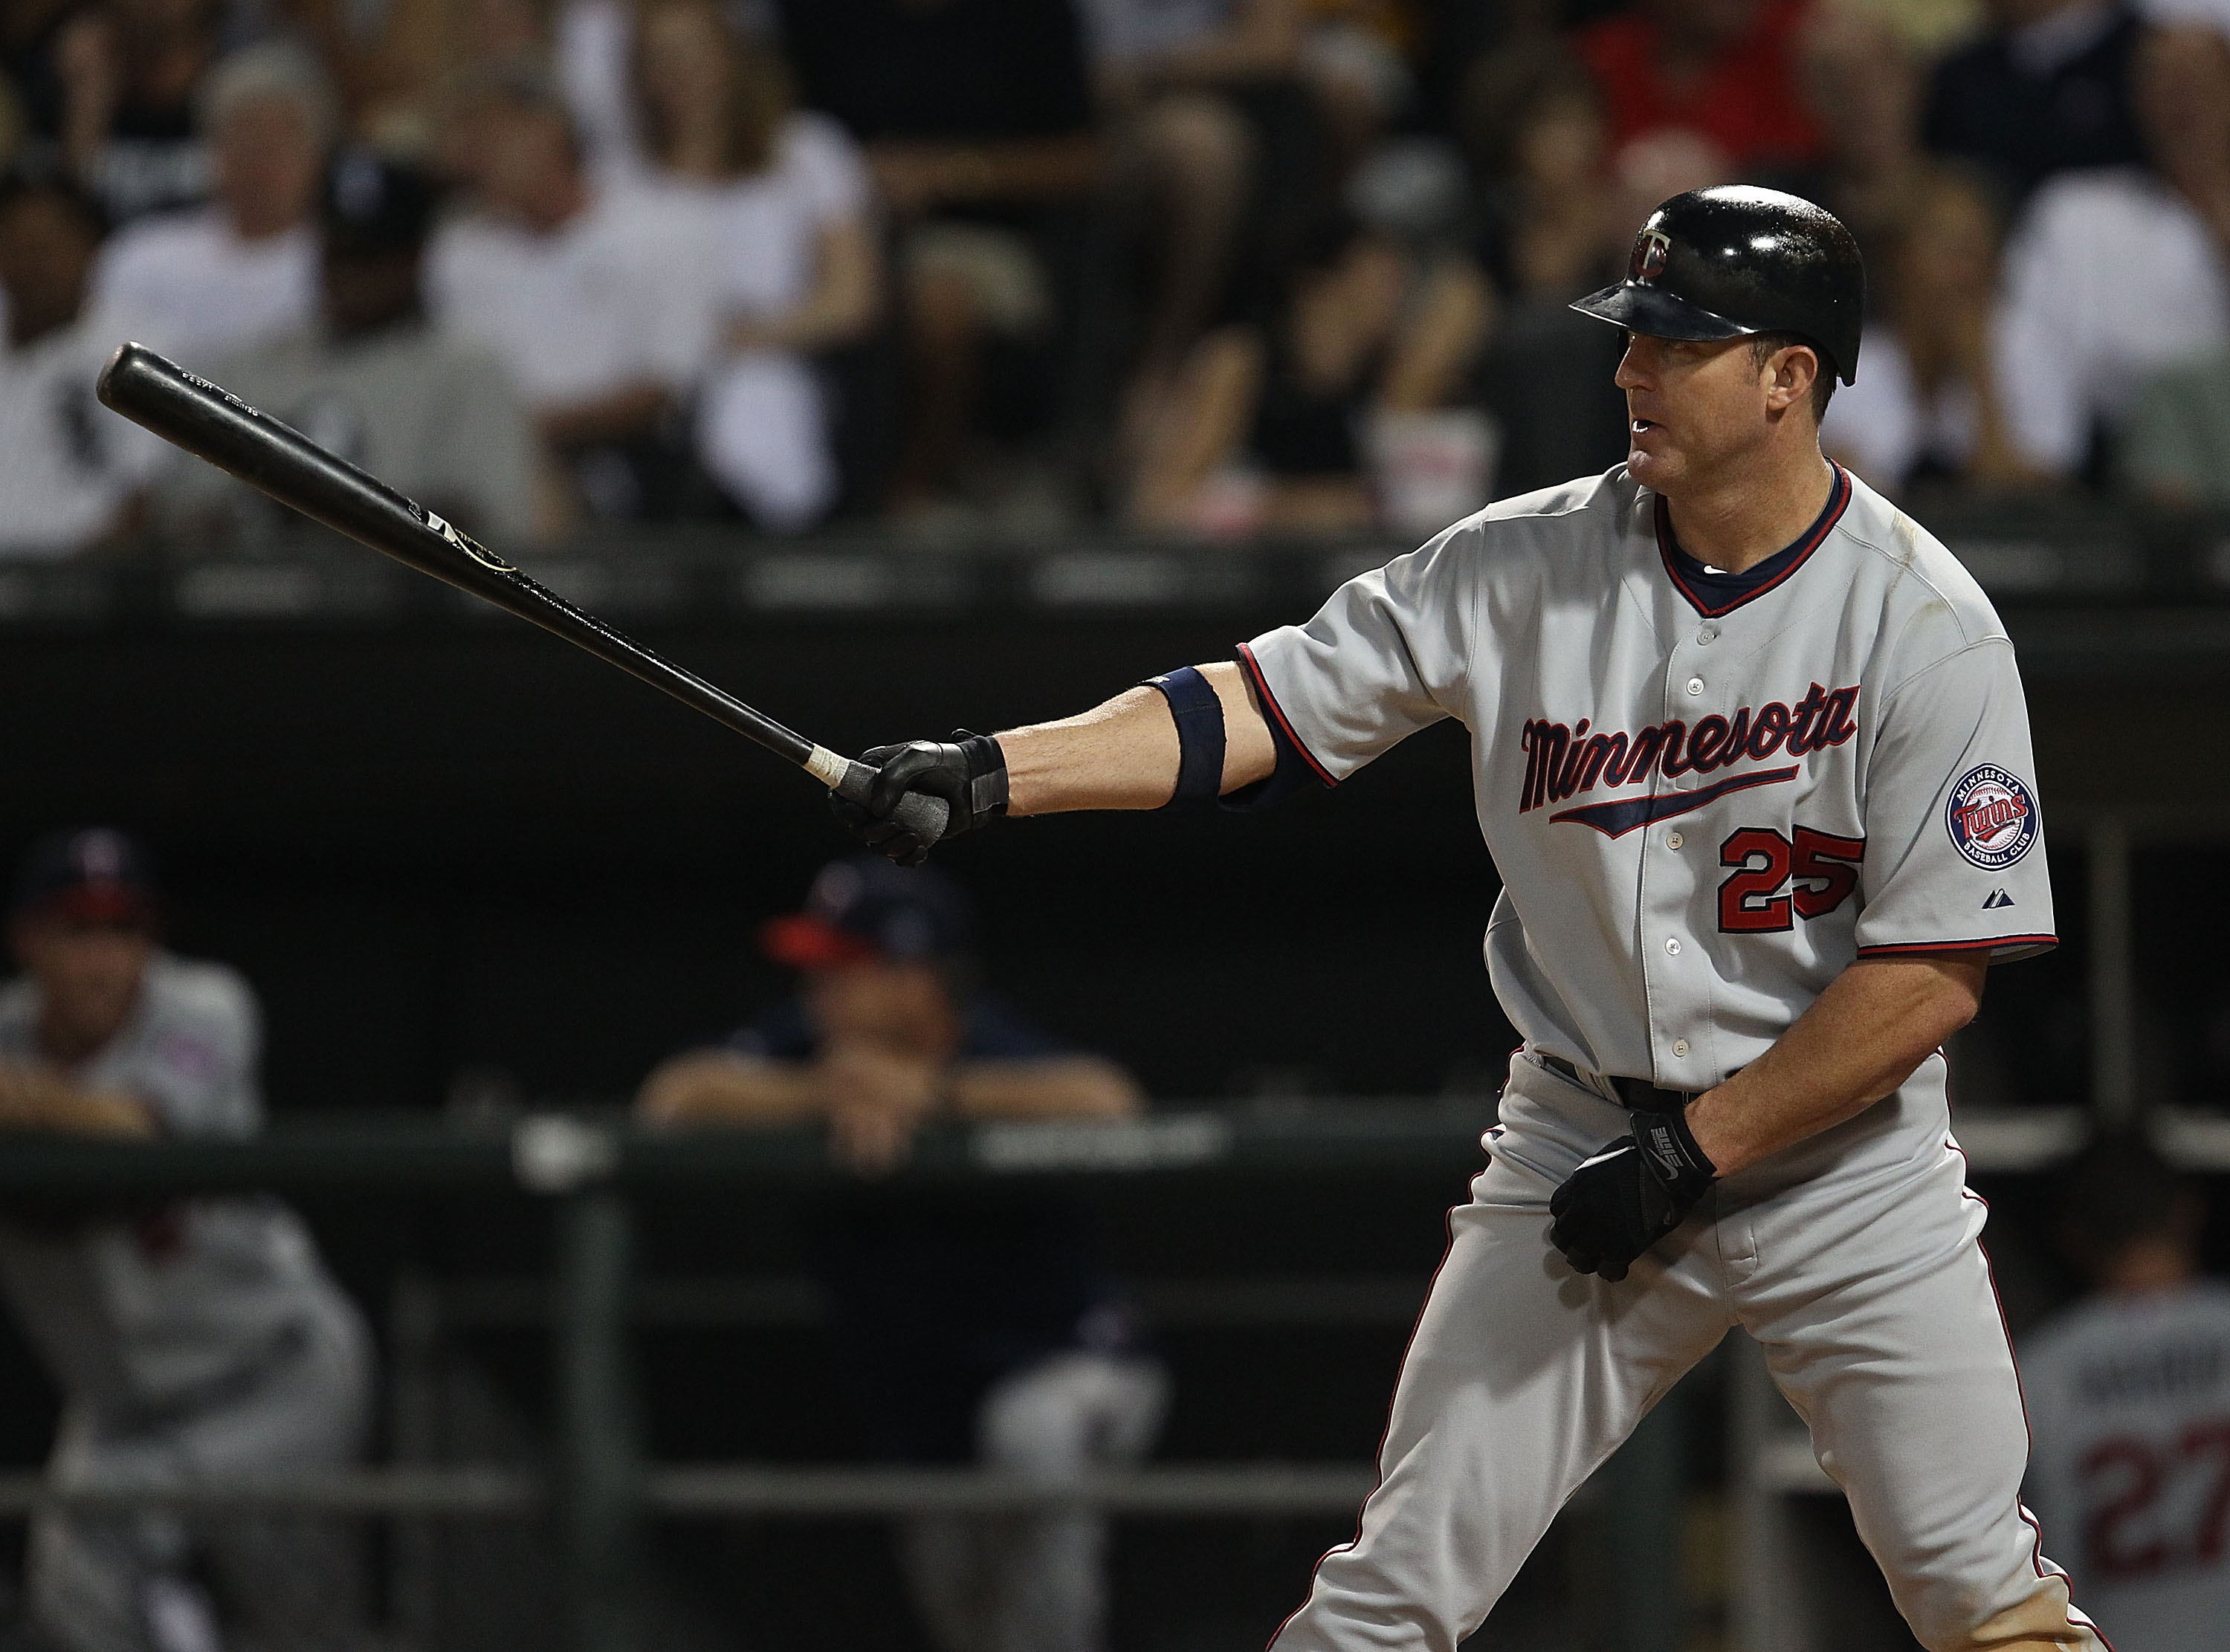 CHICAGO - AUGUST 10: Jim Thome #25 of the Minnesota Twins prepares to bat against the Chicago White Sox at U.S. Cellular Field on August 10, 2010 in Chicago, Illinois. The Twins defeated the White Sox 12-6. (Photo by Jonathan Daniel/Getty Images)